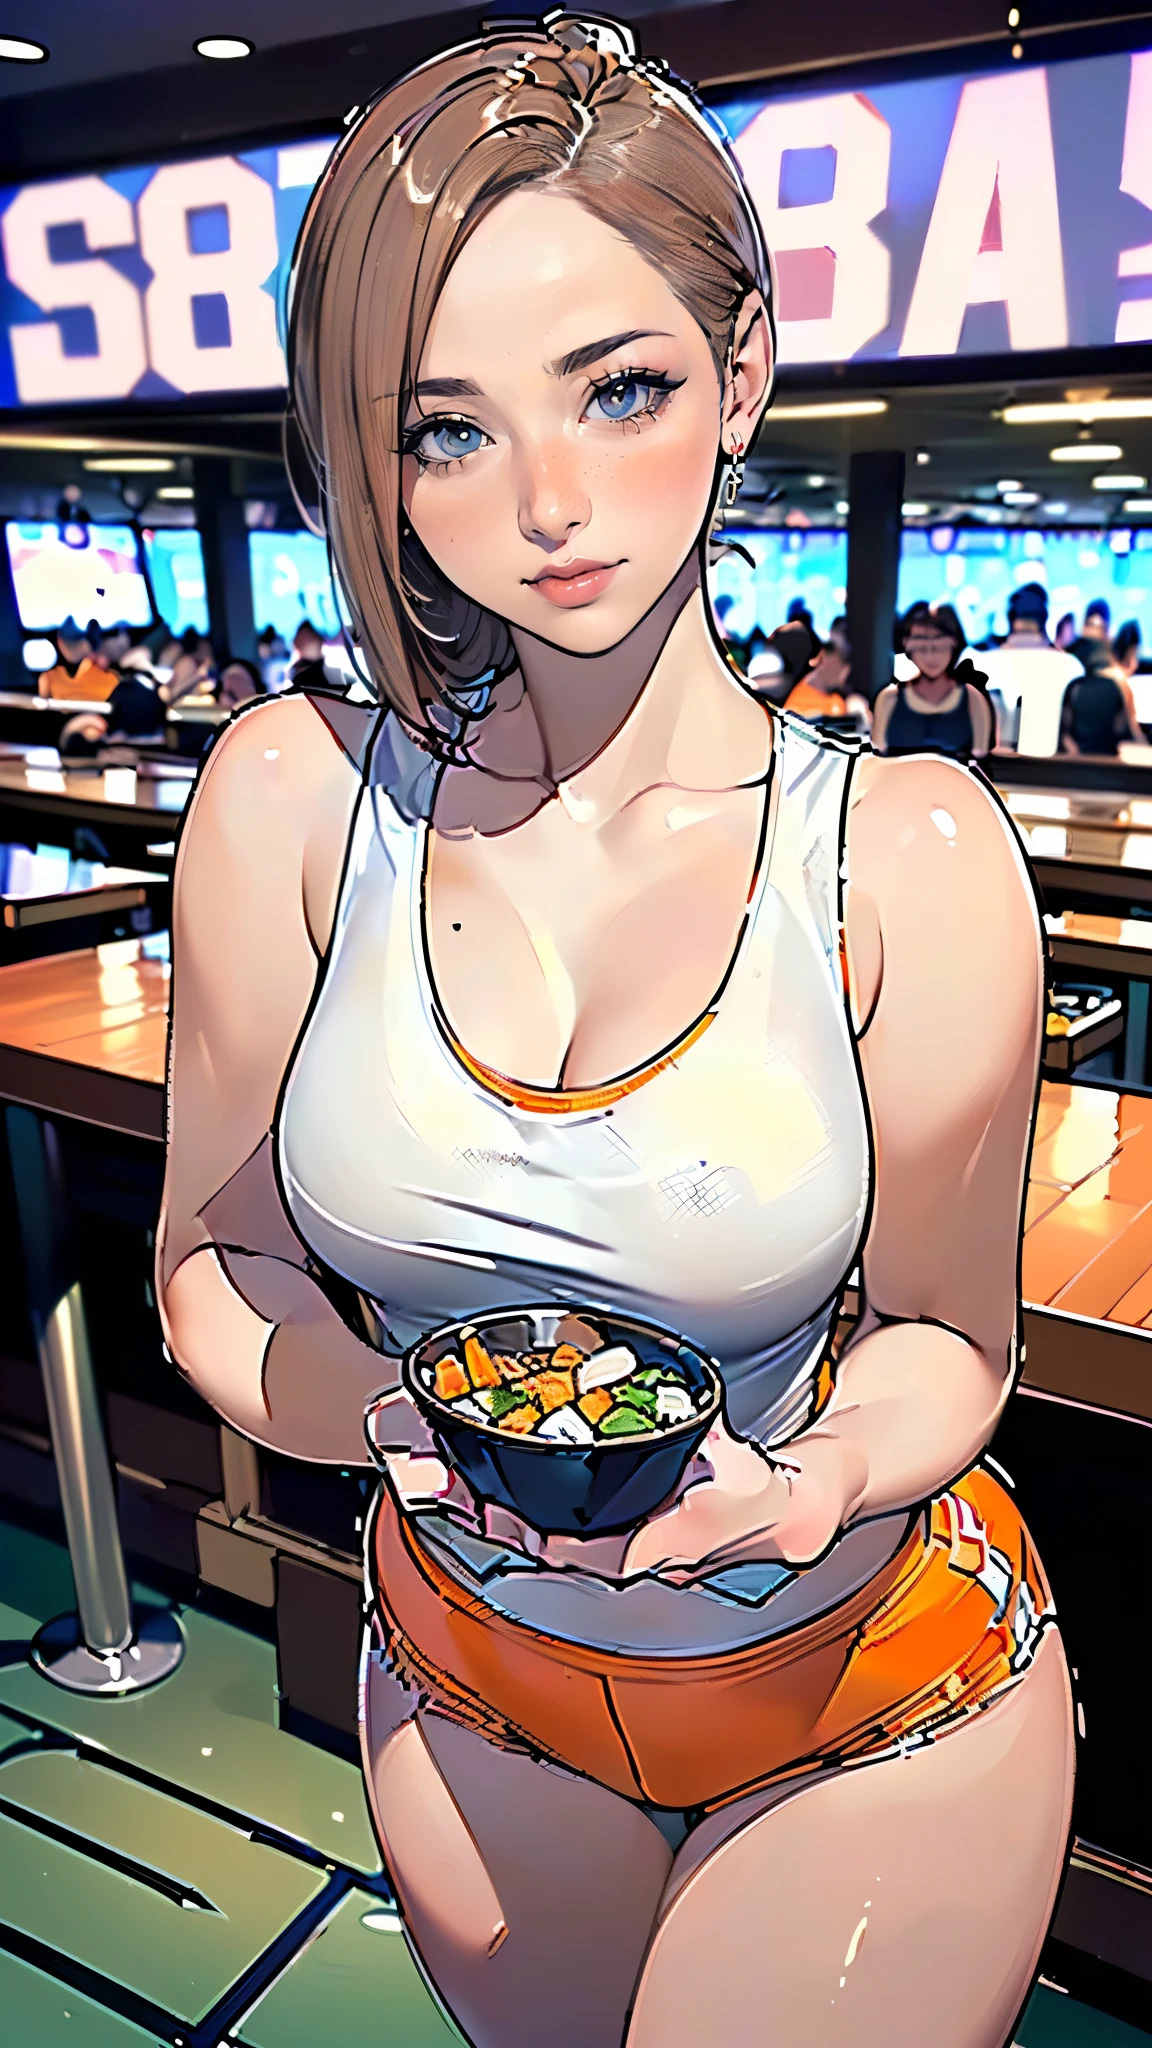 masterpiece,highest quality,Very detailed,High resolution,8k,wallpaper,Perfect lighting,BREAK(One Woman),(Mature woman working as a waiter at a sports bar:1.5),(45 years old),(hooters),(((A very form fitting white tank top:1.5))),((The tank top has the logo of a sports bar on it.:1.5)),(((tiny orange shorts))),(((Very detailed costume drawings:1.5))),(Beautiful Eyes:1.5),(Detailed face drawing:1.5),(Detailed face drawing:1.5),((Very detailed female hand:1.5)),(Shiny skin:1.2),(Big Breasts:1.2),(Thick thighs:1.5),(Sensual body:1.5),(Sports bar background:1.5),(((Blur the background:1.5))),(((Carrying food:1.5)))